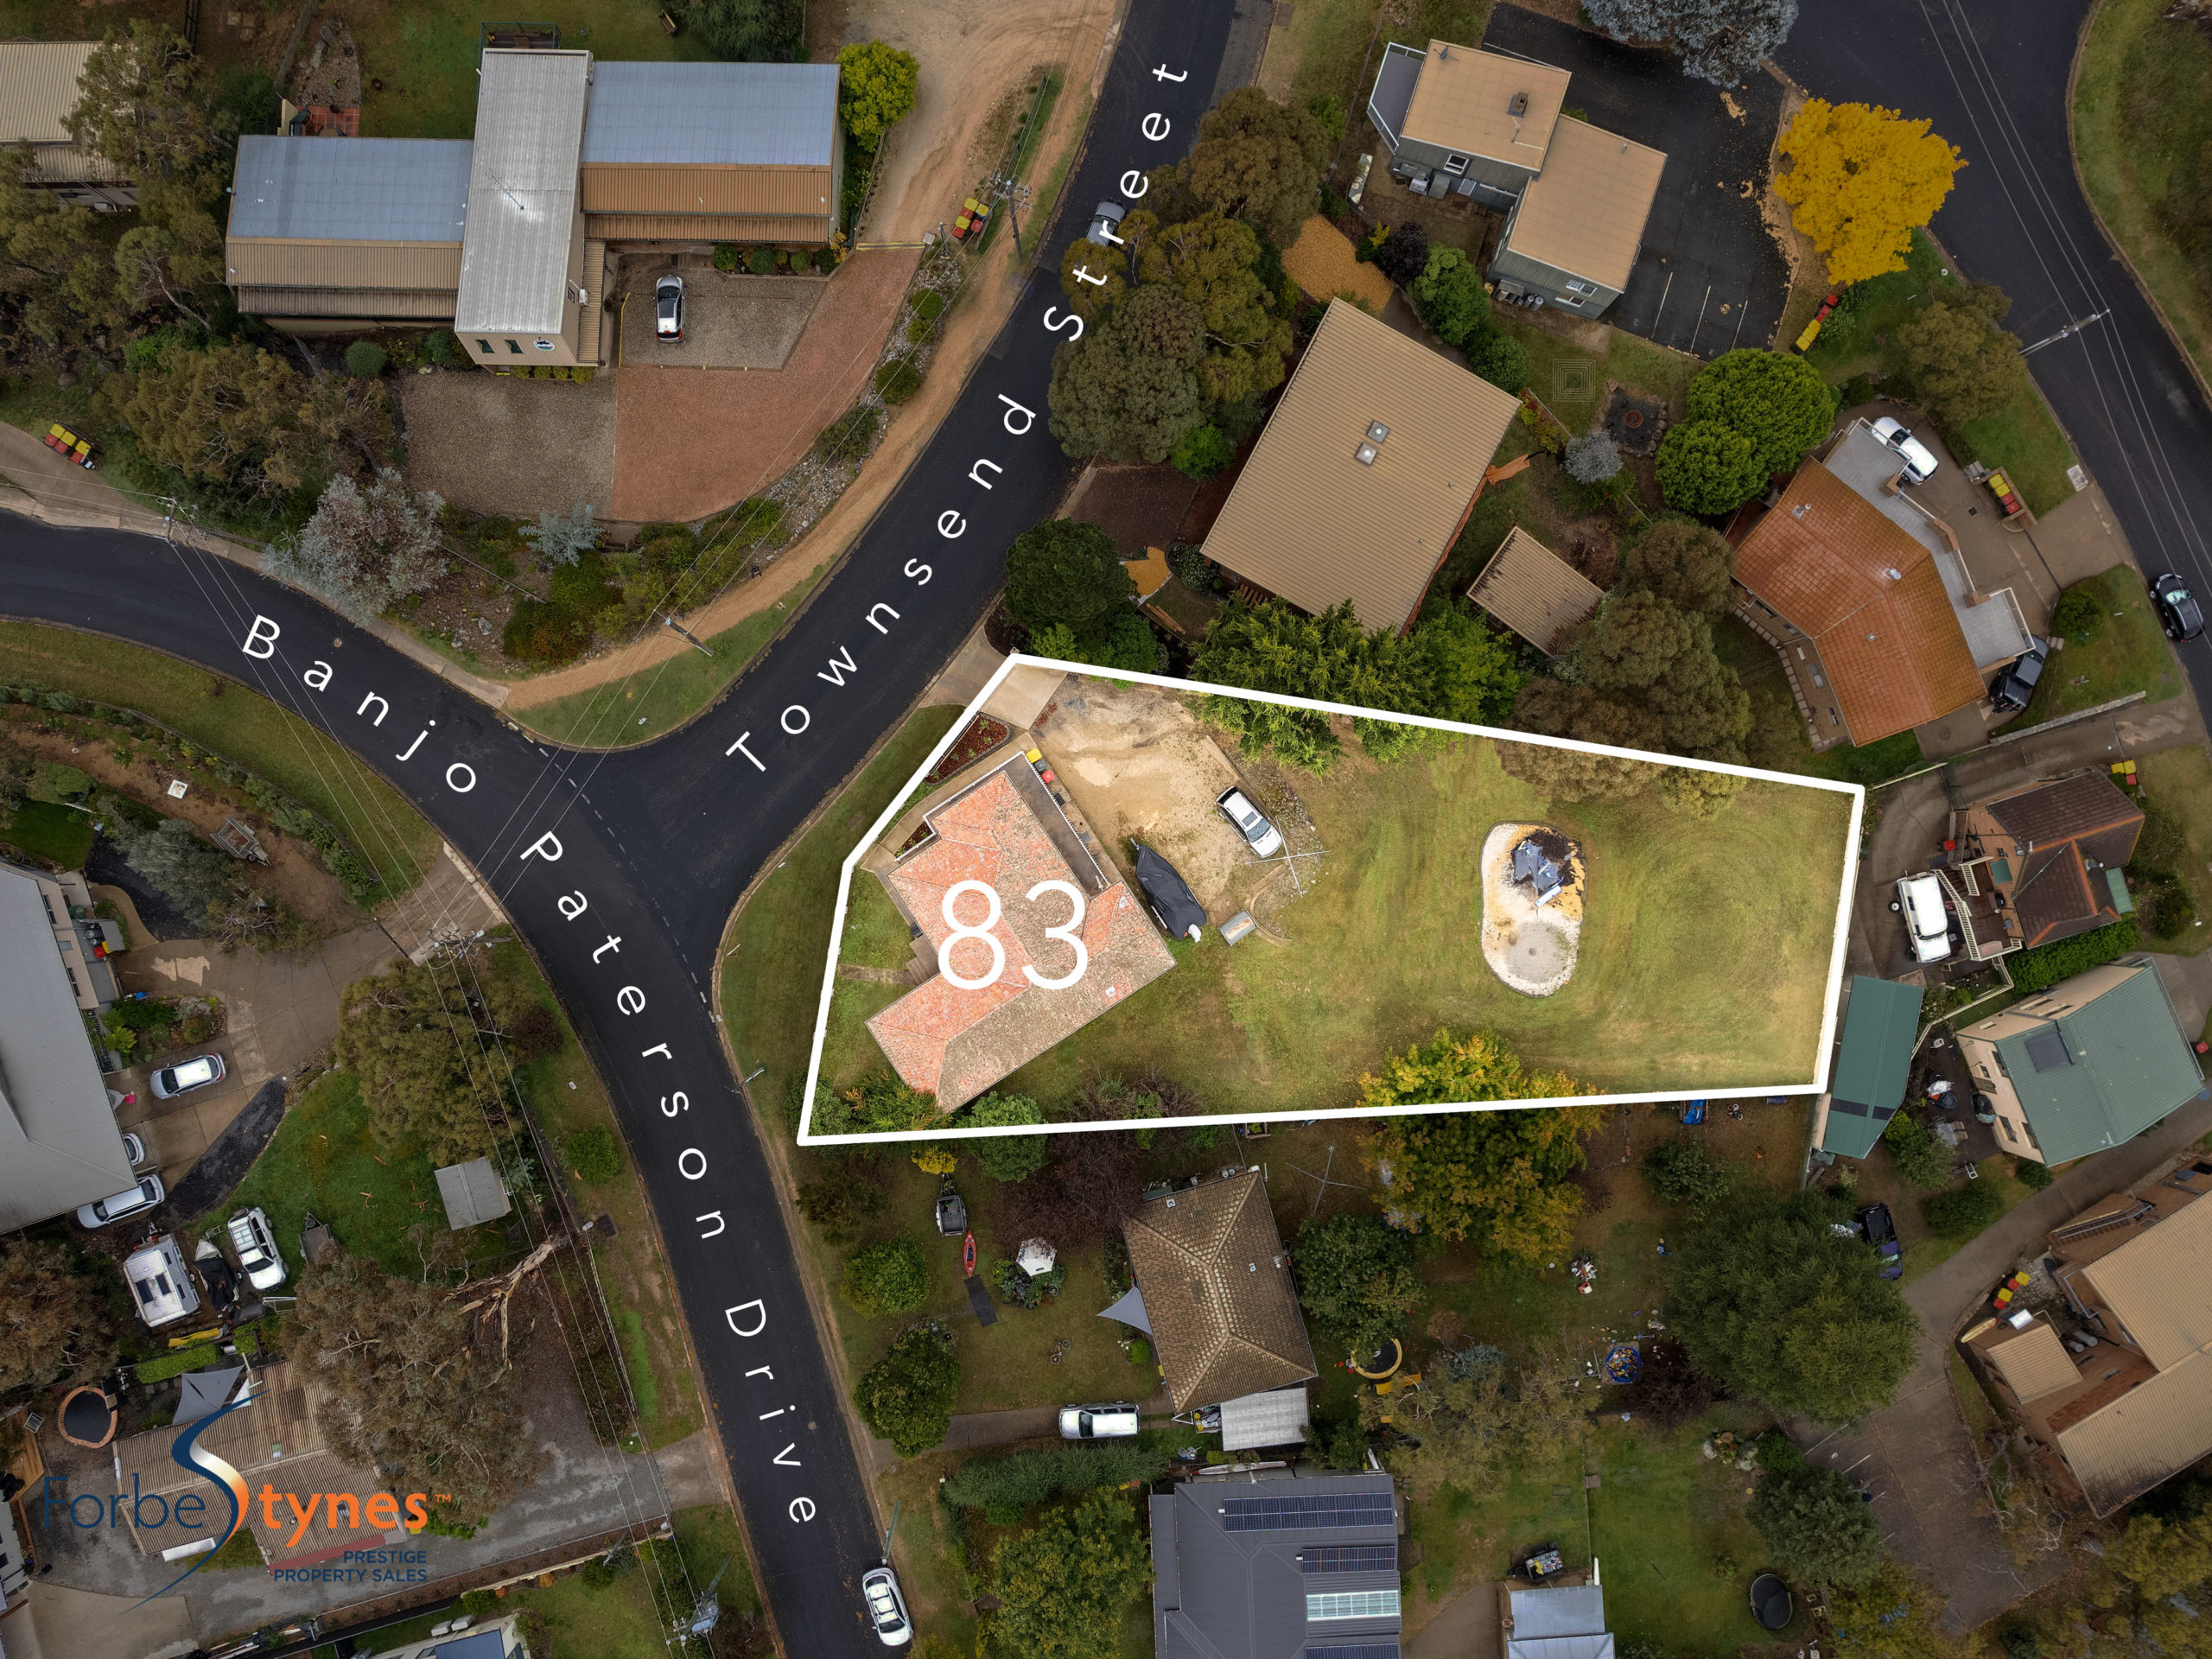 Enormous 1415sqm block – With substantial home and space to build additional dwellings